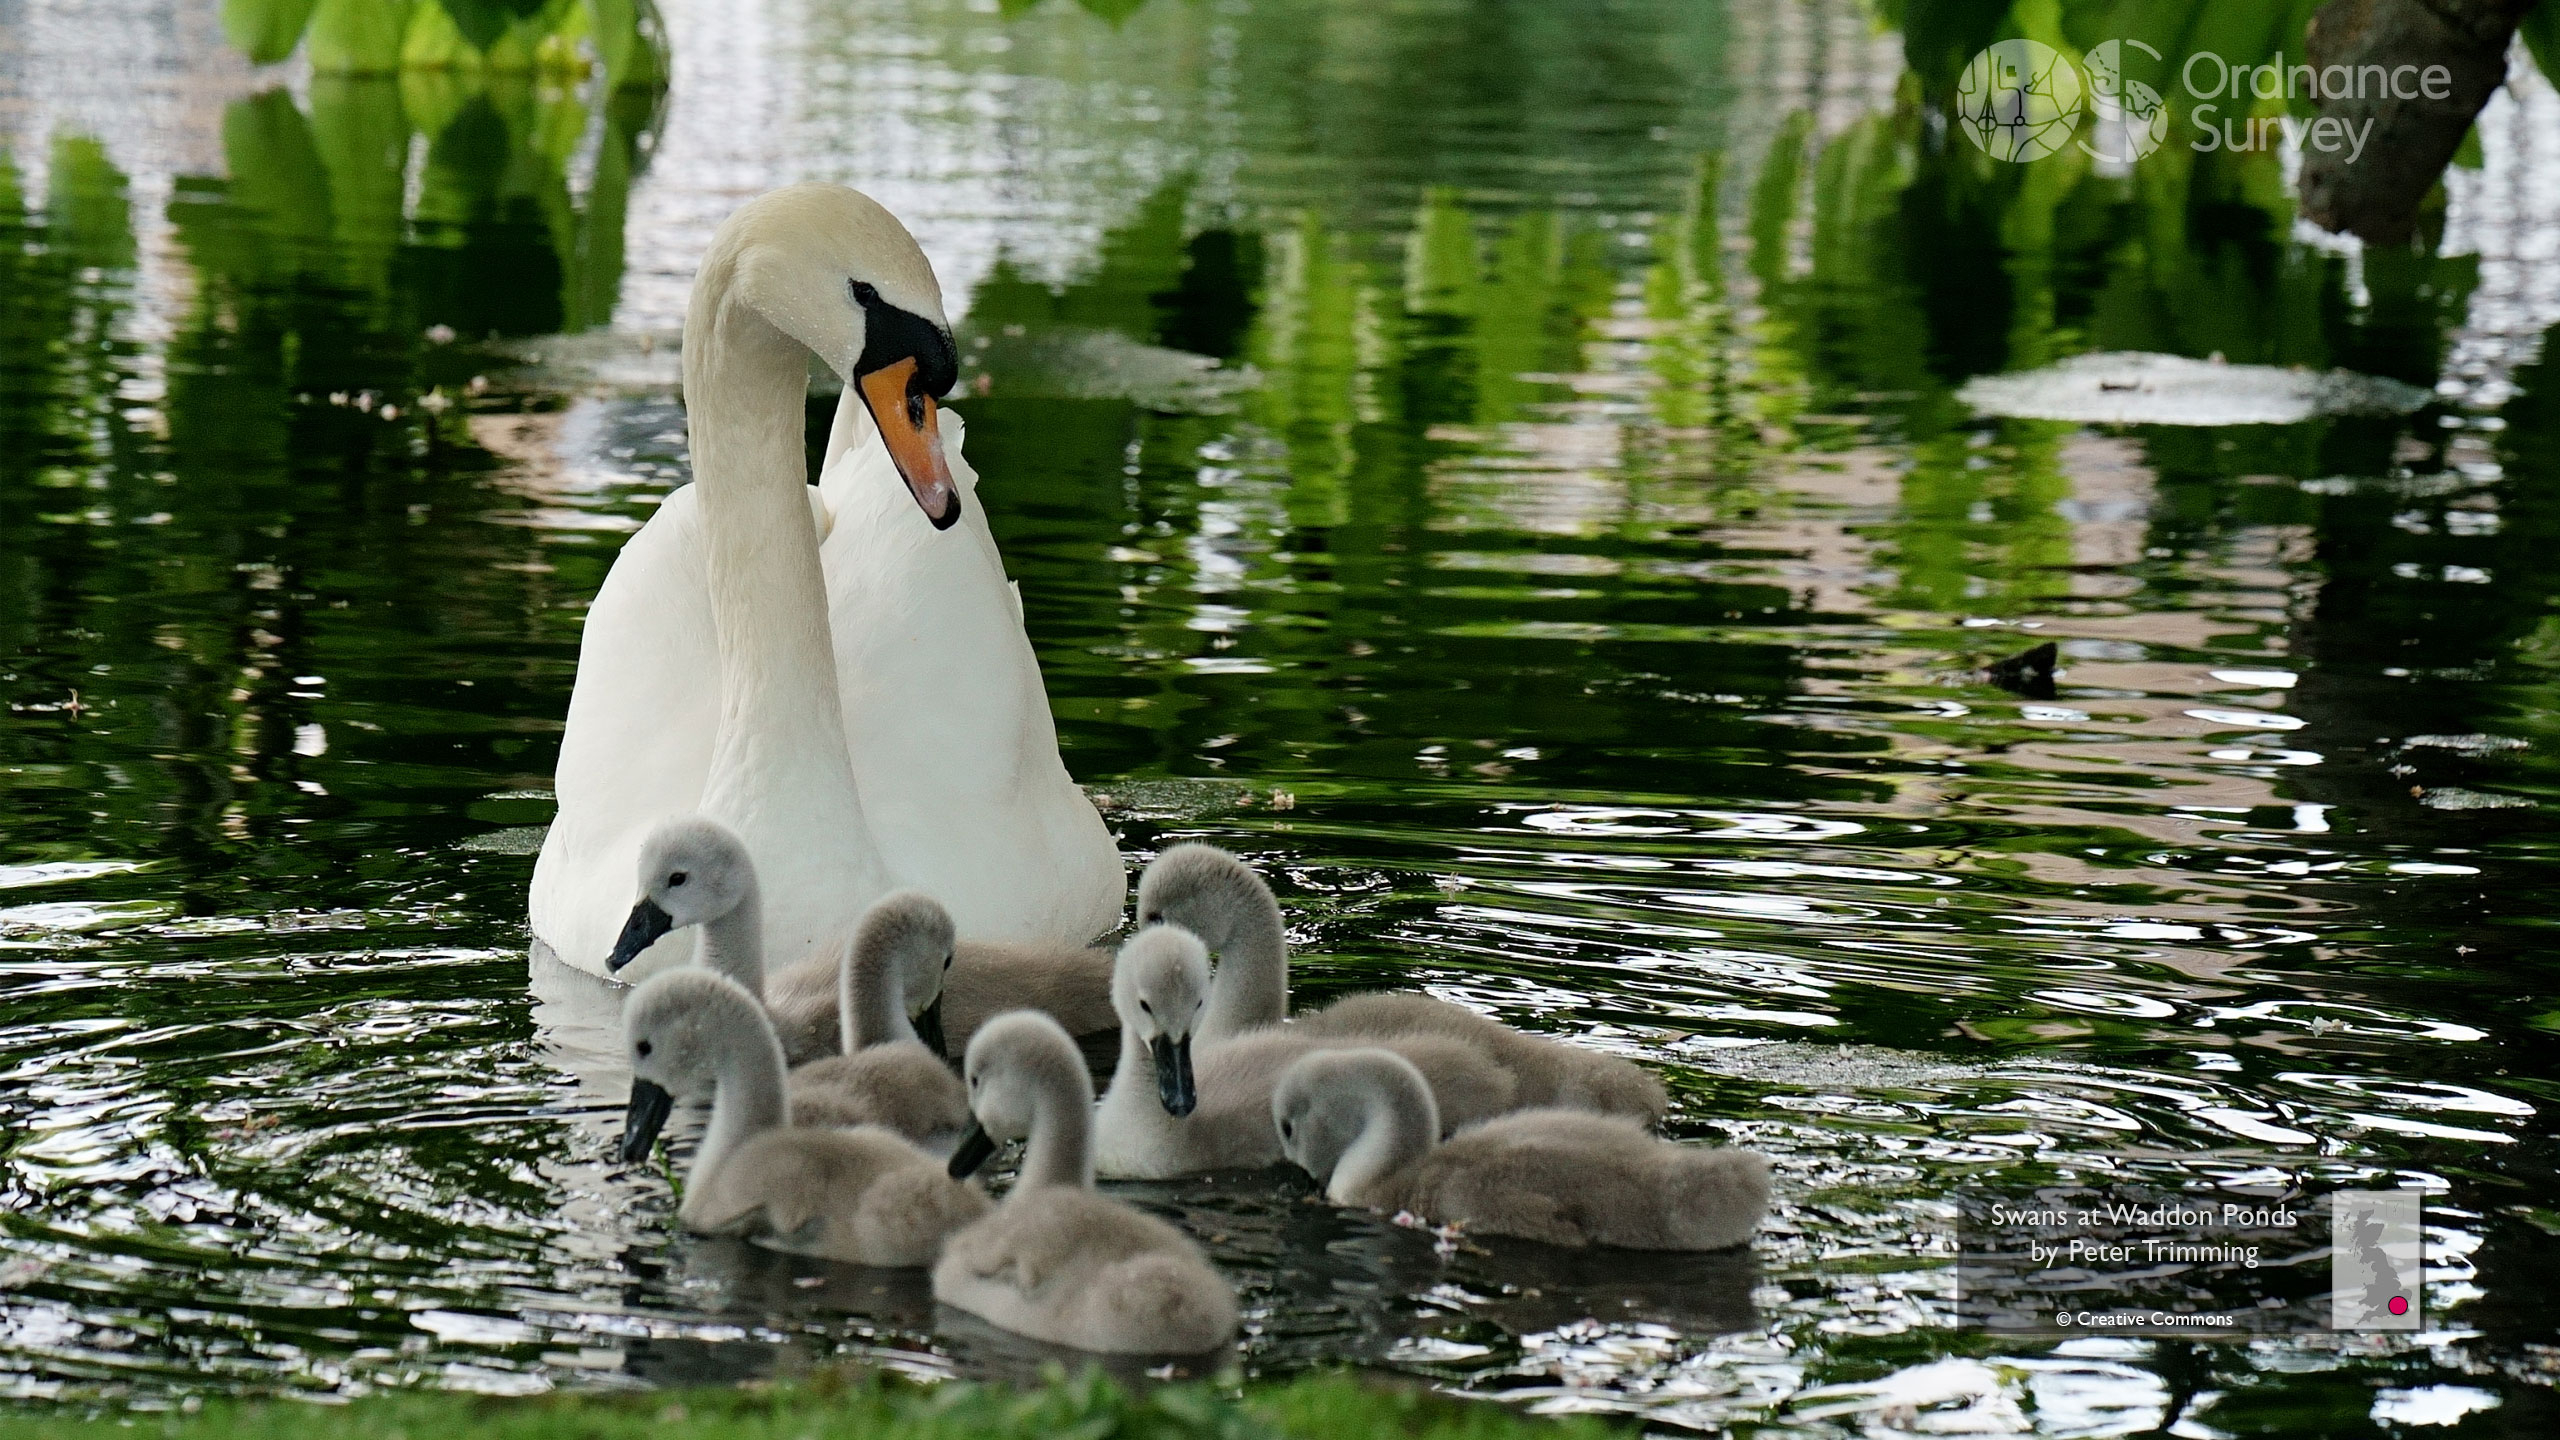 2560x1440 OS Wallpaper Download: May 2022 Swans at Waddon Ponds by Peter Trimming